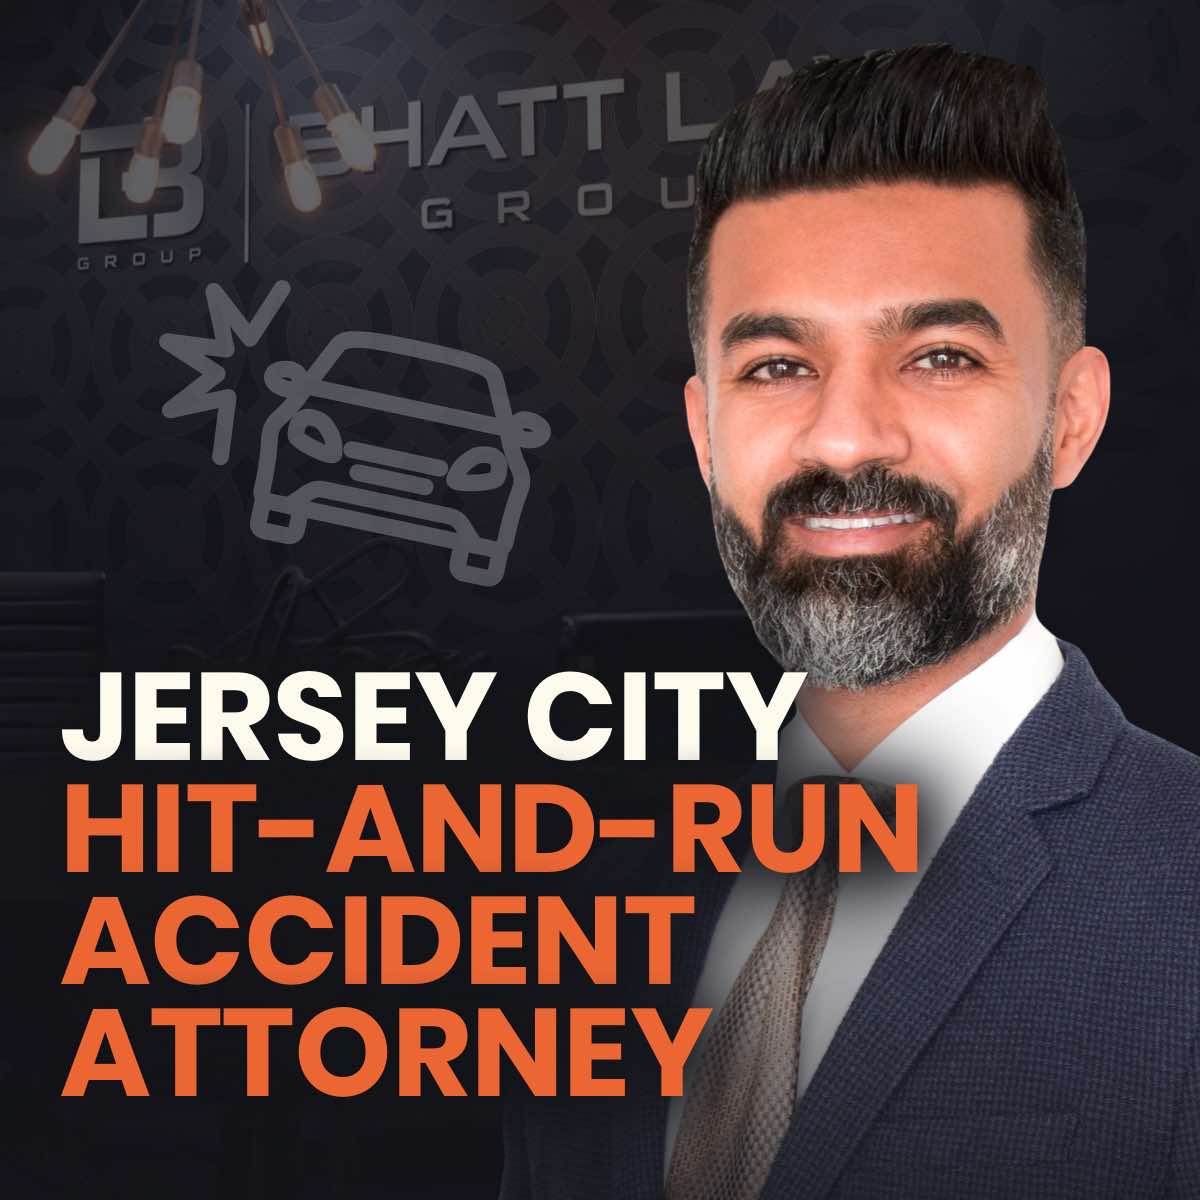 Jersey City Hit-and-Run Accident Attorney